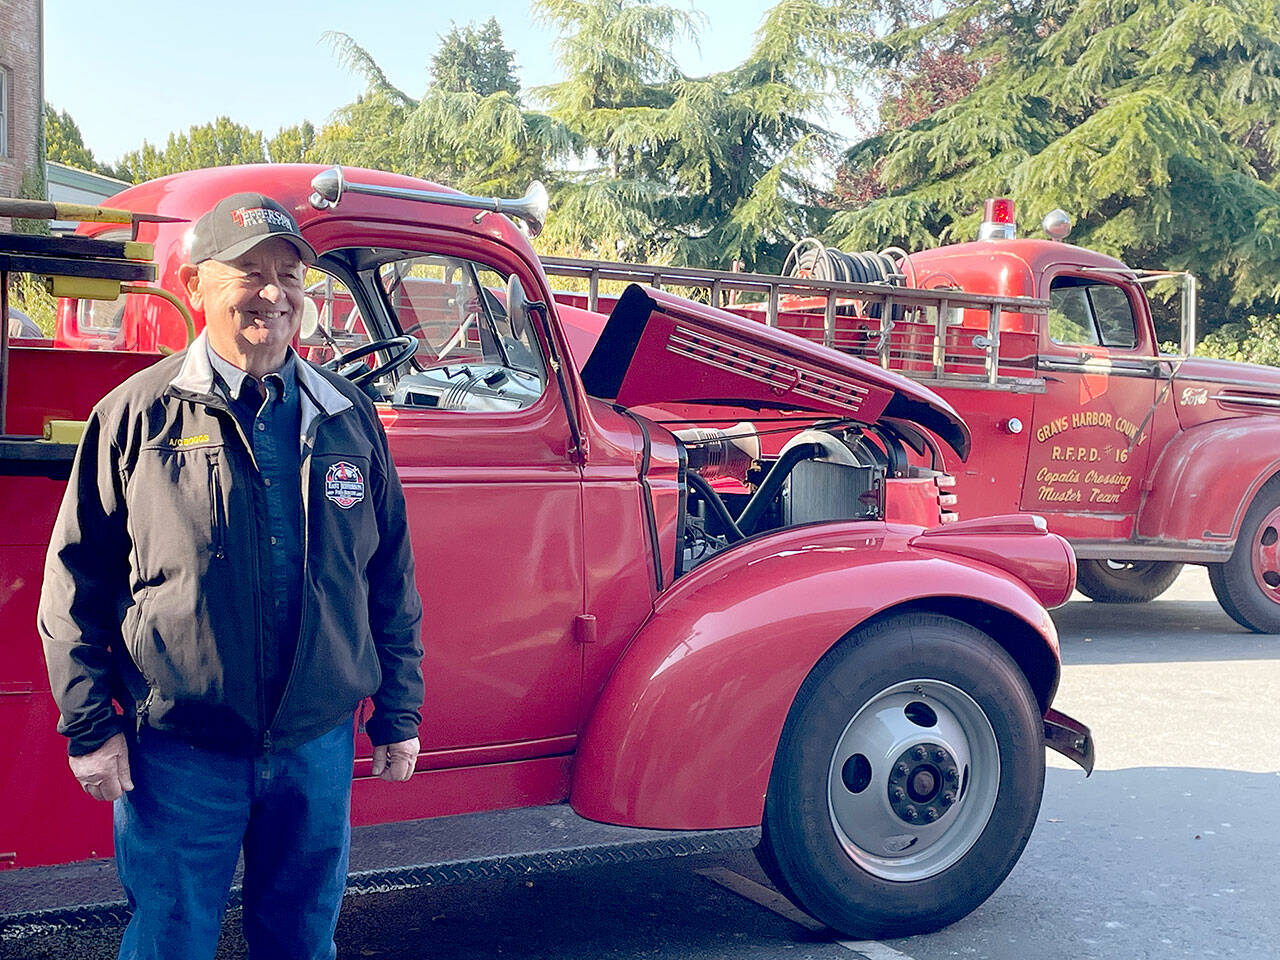 Chuck Boggs began his career as a firefighter in 1971 and retired as assistant chief of East Jefferson Fire and Rescue in 2010. Boggs attended the 150th anniversary celebration of the department Saturday at Port Townsend City Hall where vintage fire engines were on display. (Paula Hunt/Peninsula Daily News)